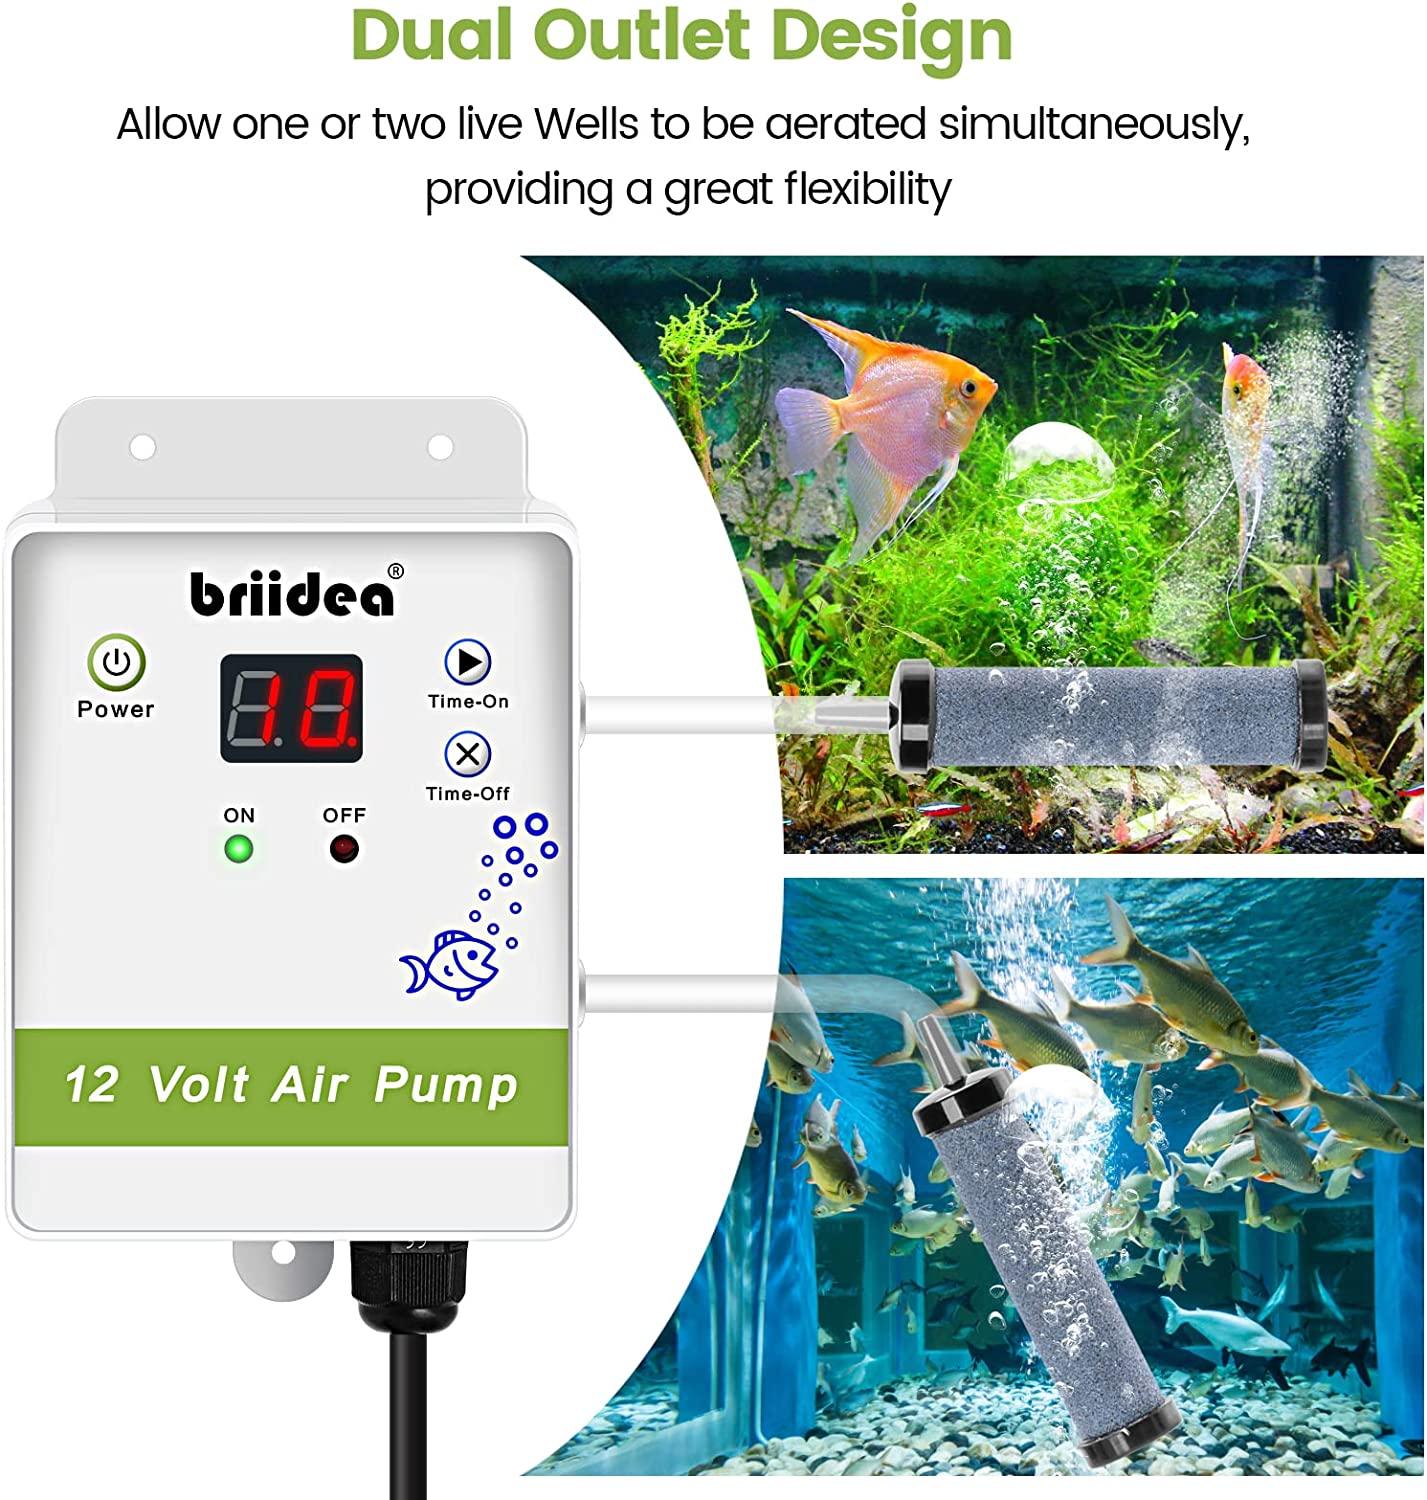 Aerator for Bait Bucket, Briidea 12 Volt Livewell Aerator Pump System with Timing Cycle Function, Dual Outlet, Designed for Use in Fresh and Salt Water, Keep Your Bait Fish Alive